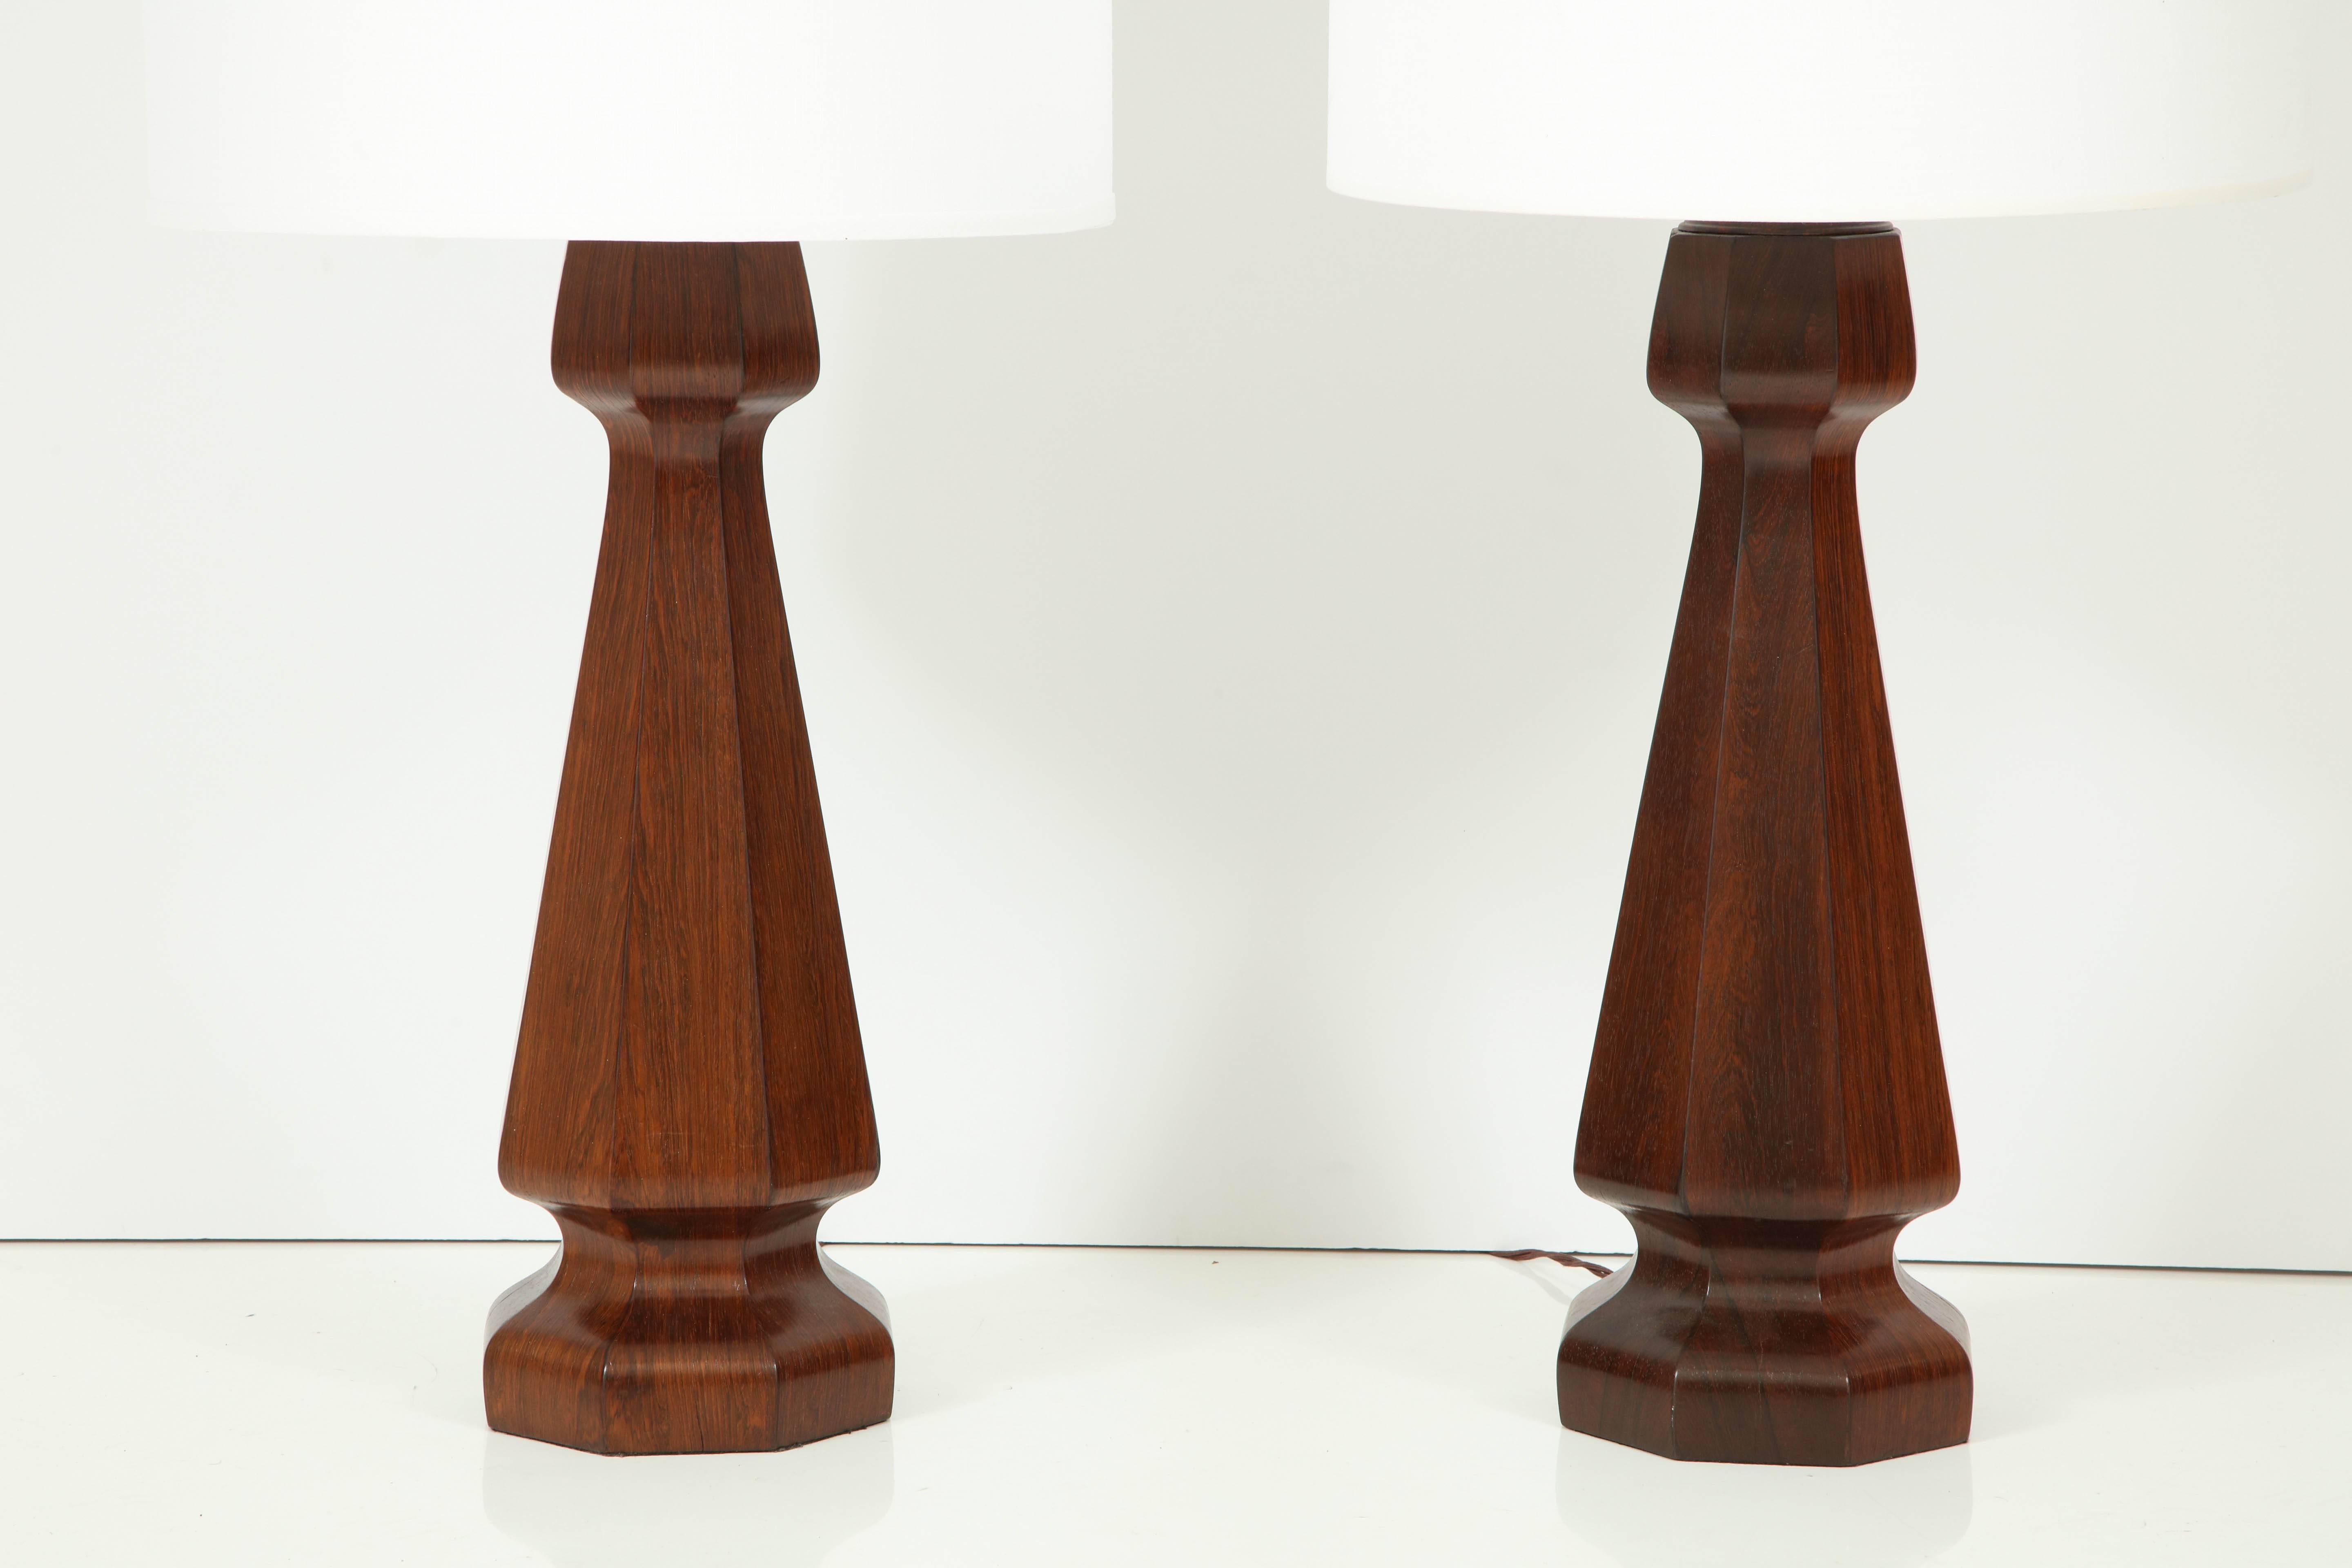 Large and heavy solid rosewood lamps. Refinished and rewired.